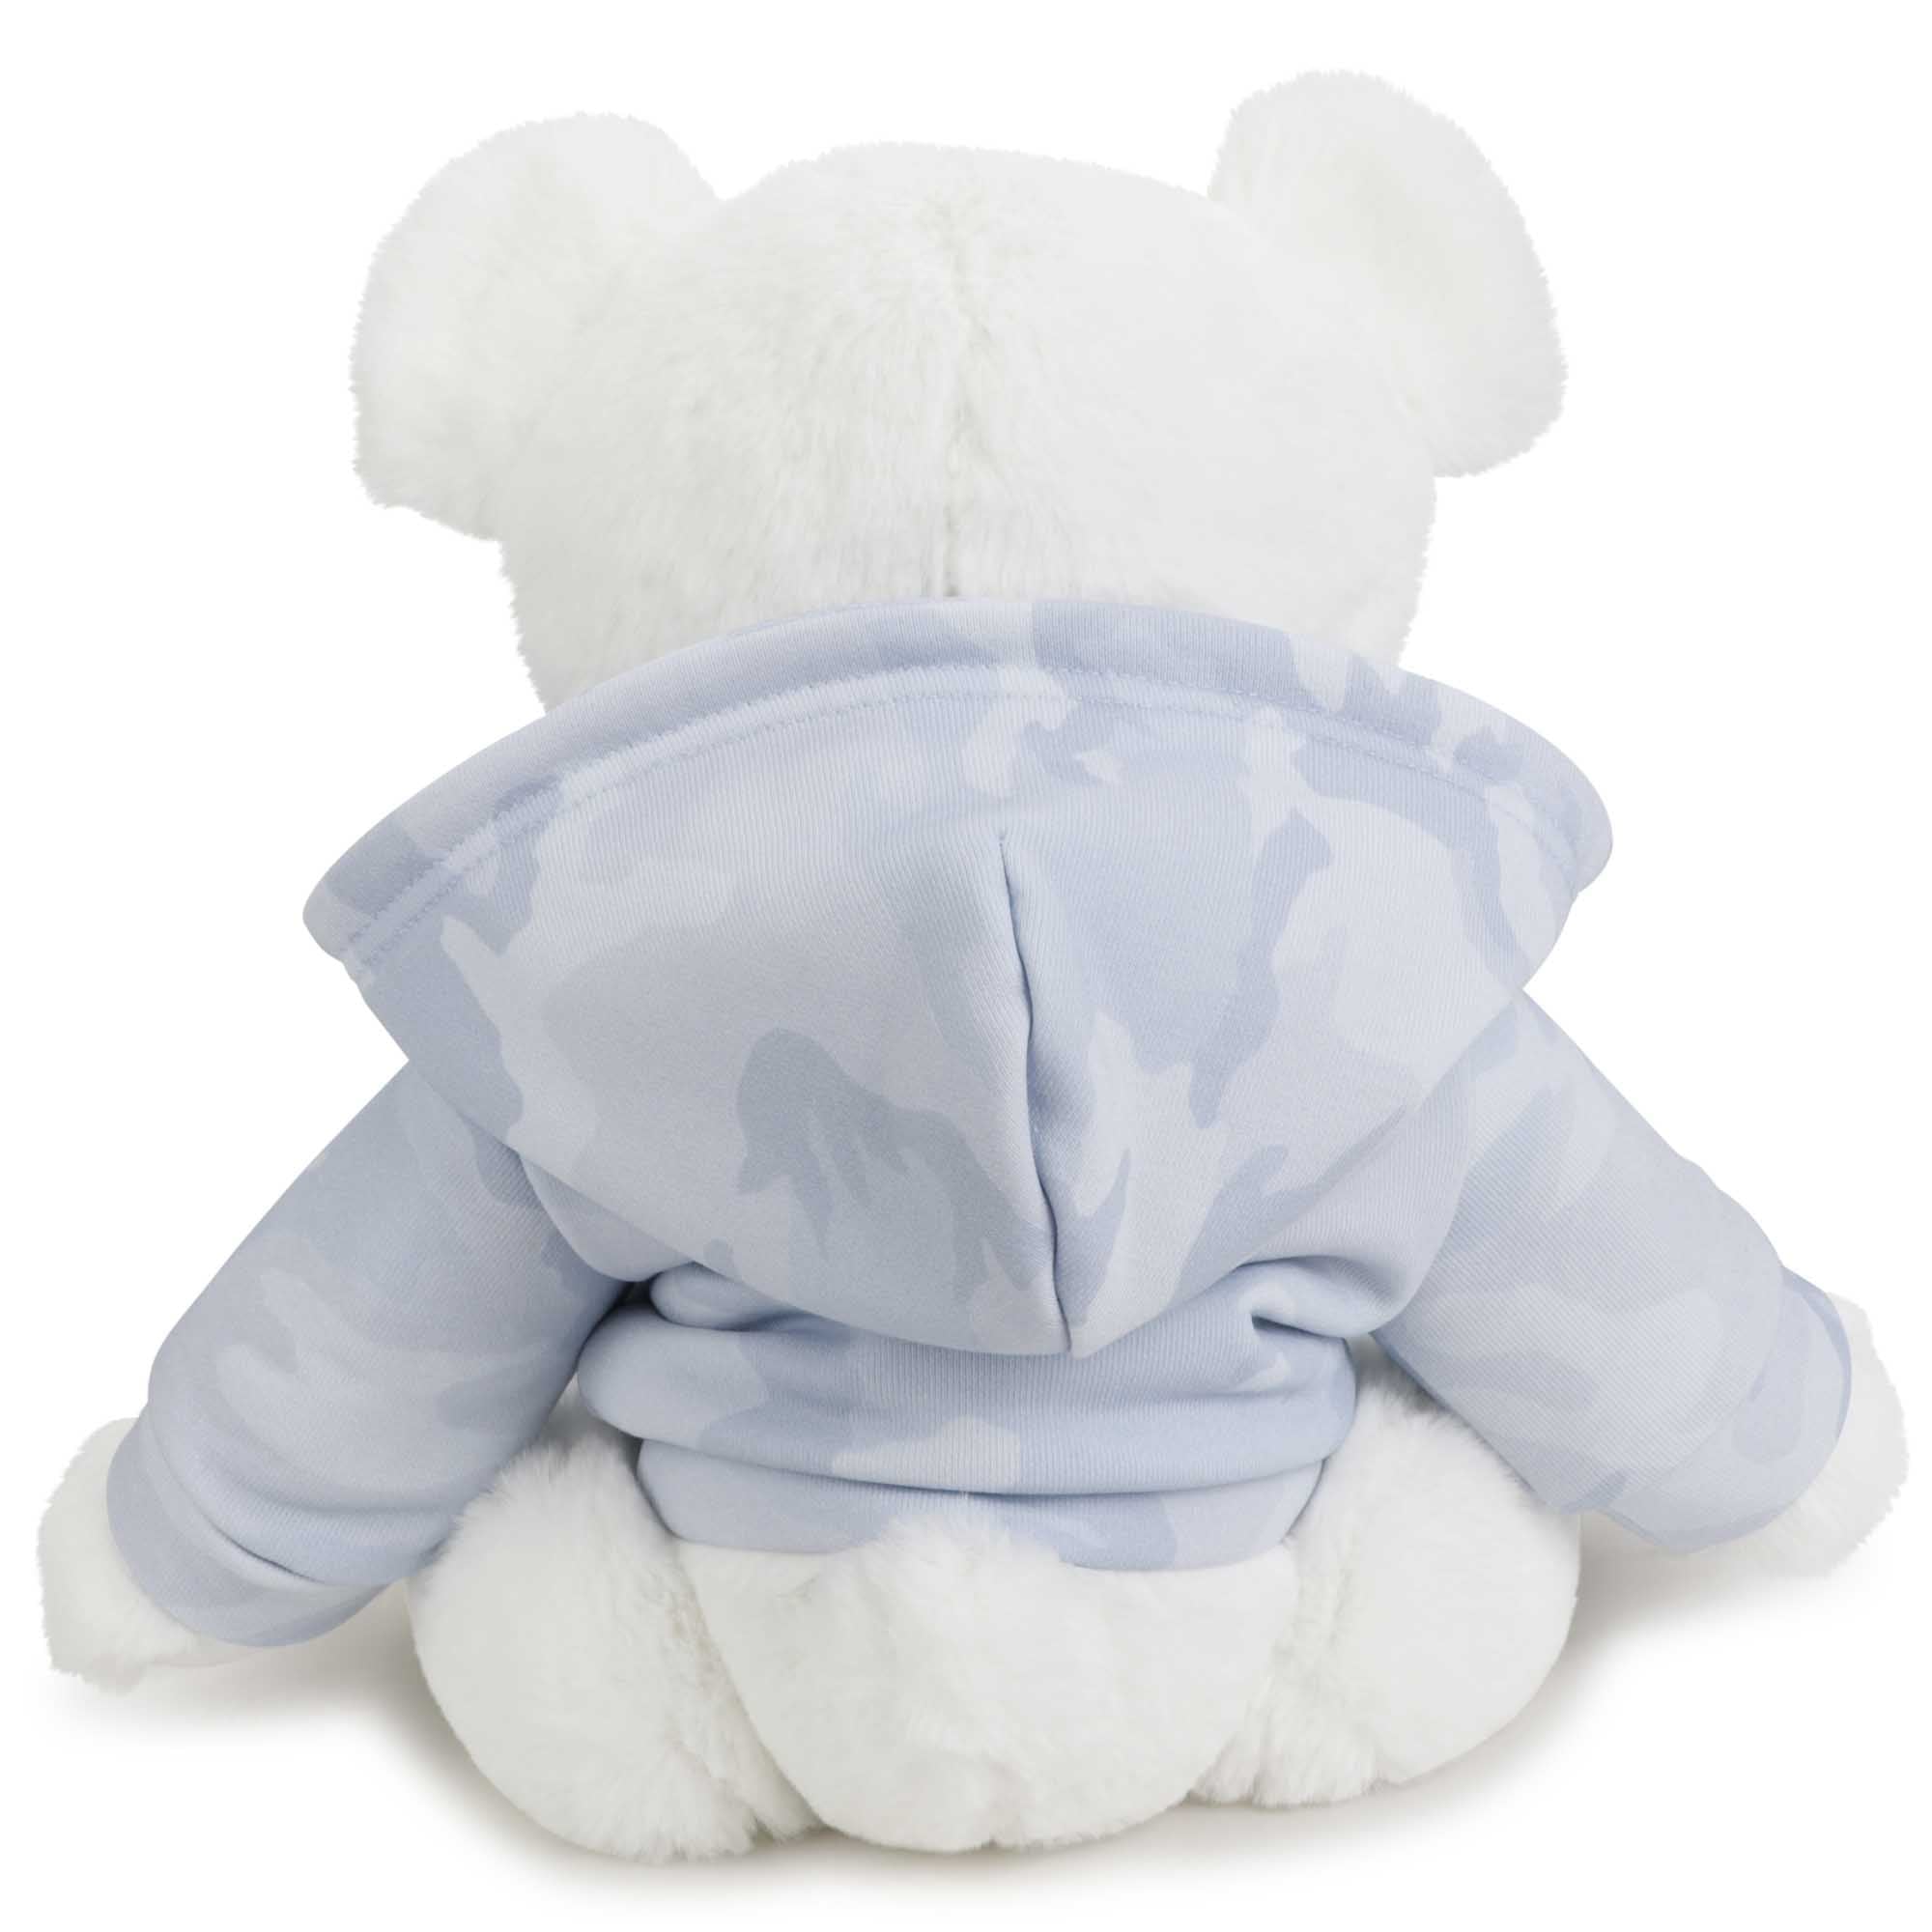 Givenchy White and Blue Teddy Bear